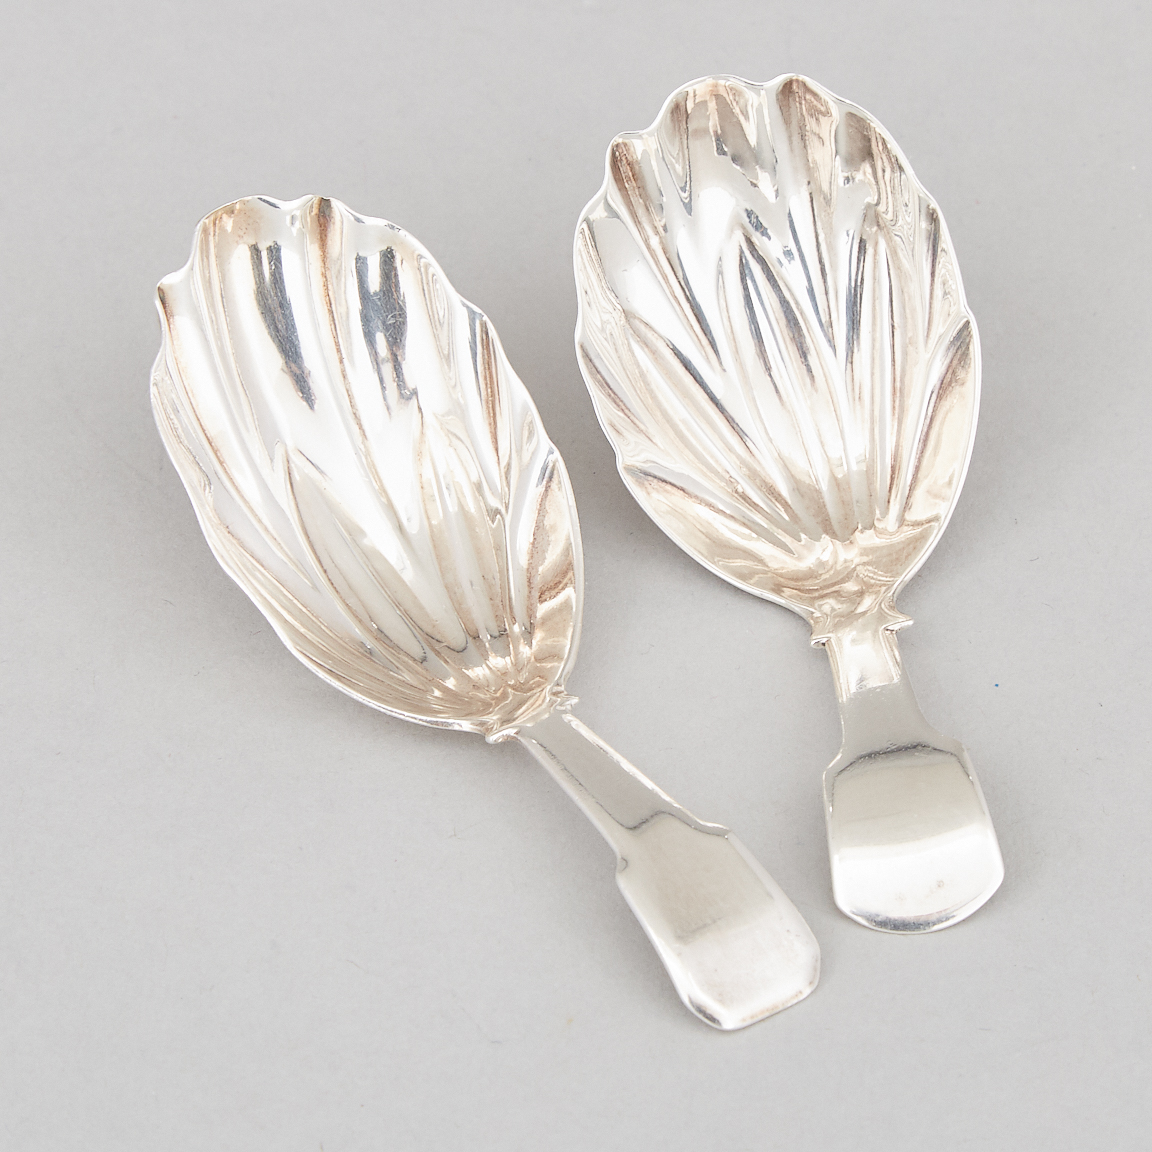 Two Georgian Silver Bud Shaped Caddy Spoons, Josiah Snatt and another, London, 1807/21